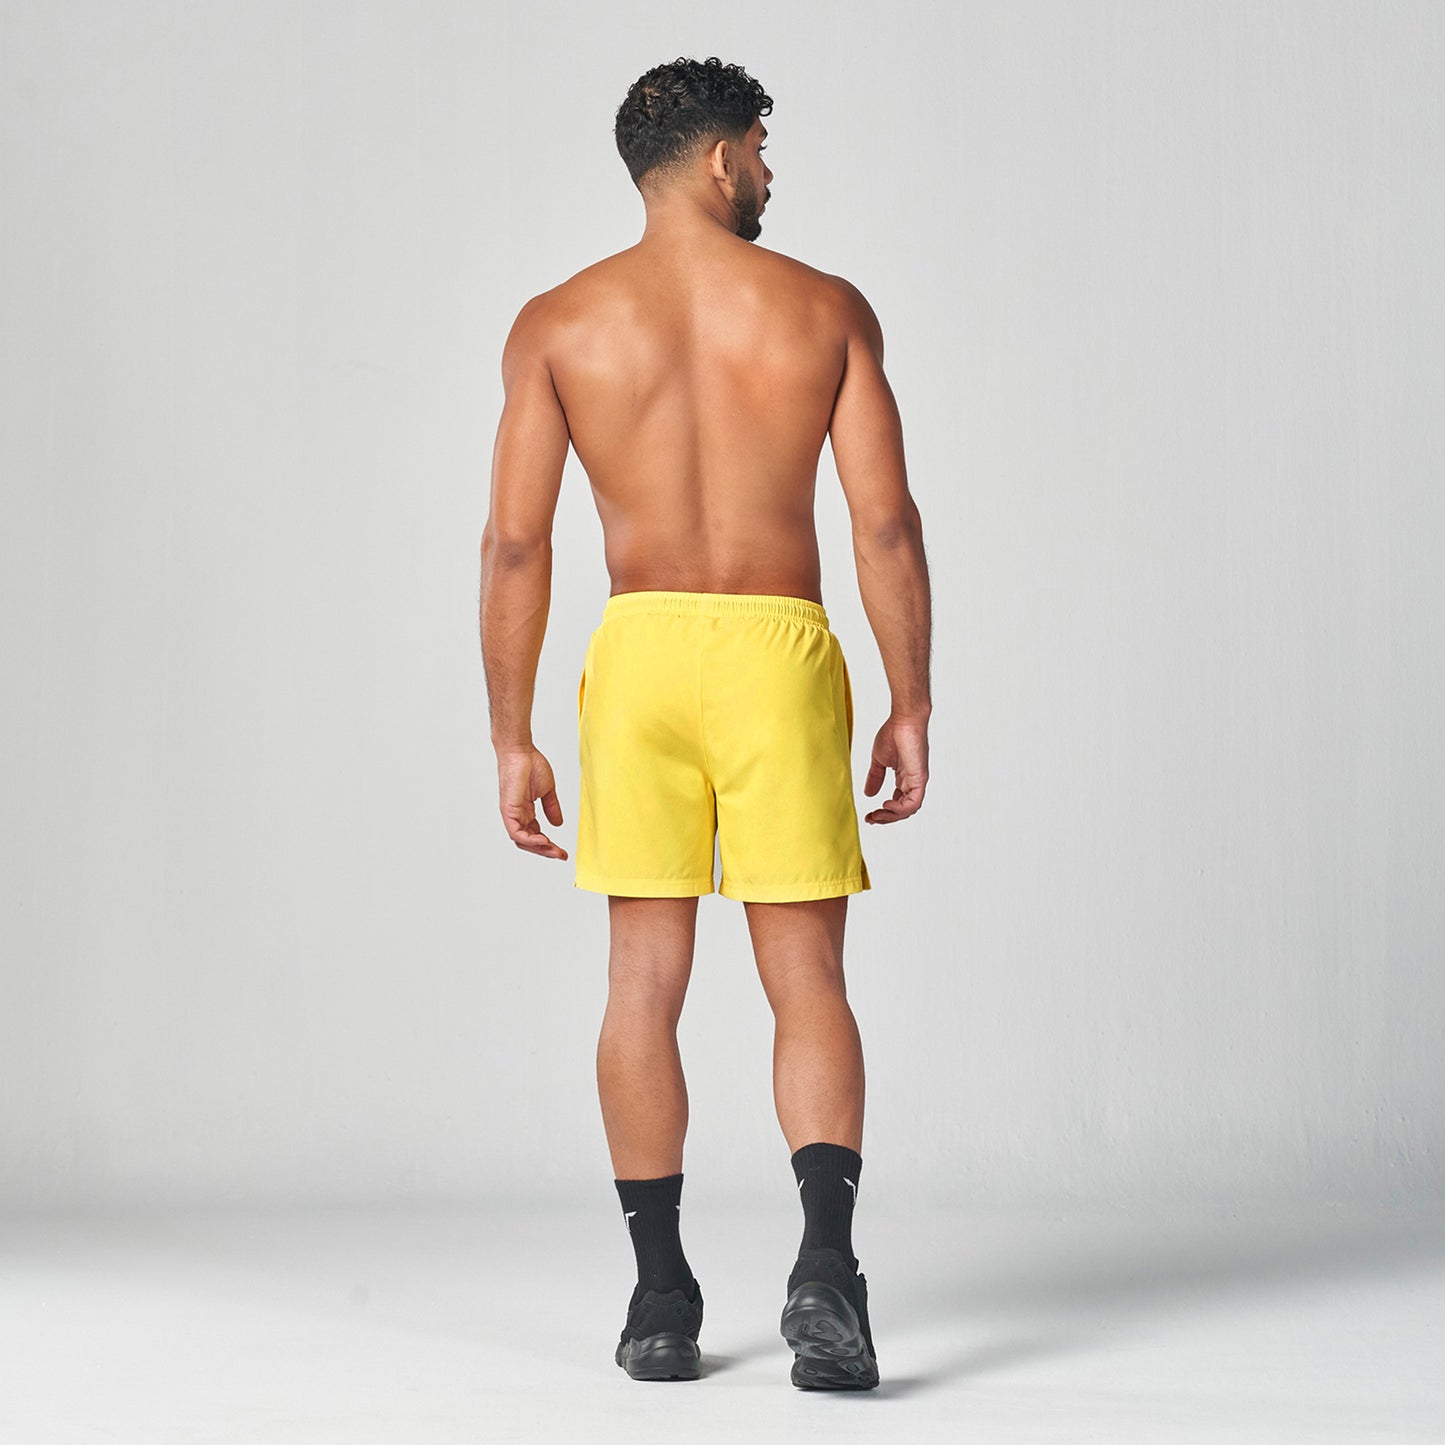 squatwolf-gym-wear-essential-5-inch-shorts-yellow-workout-short-for-men